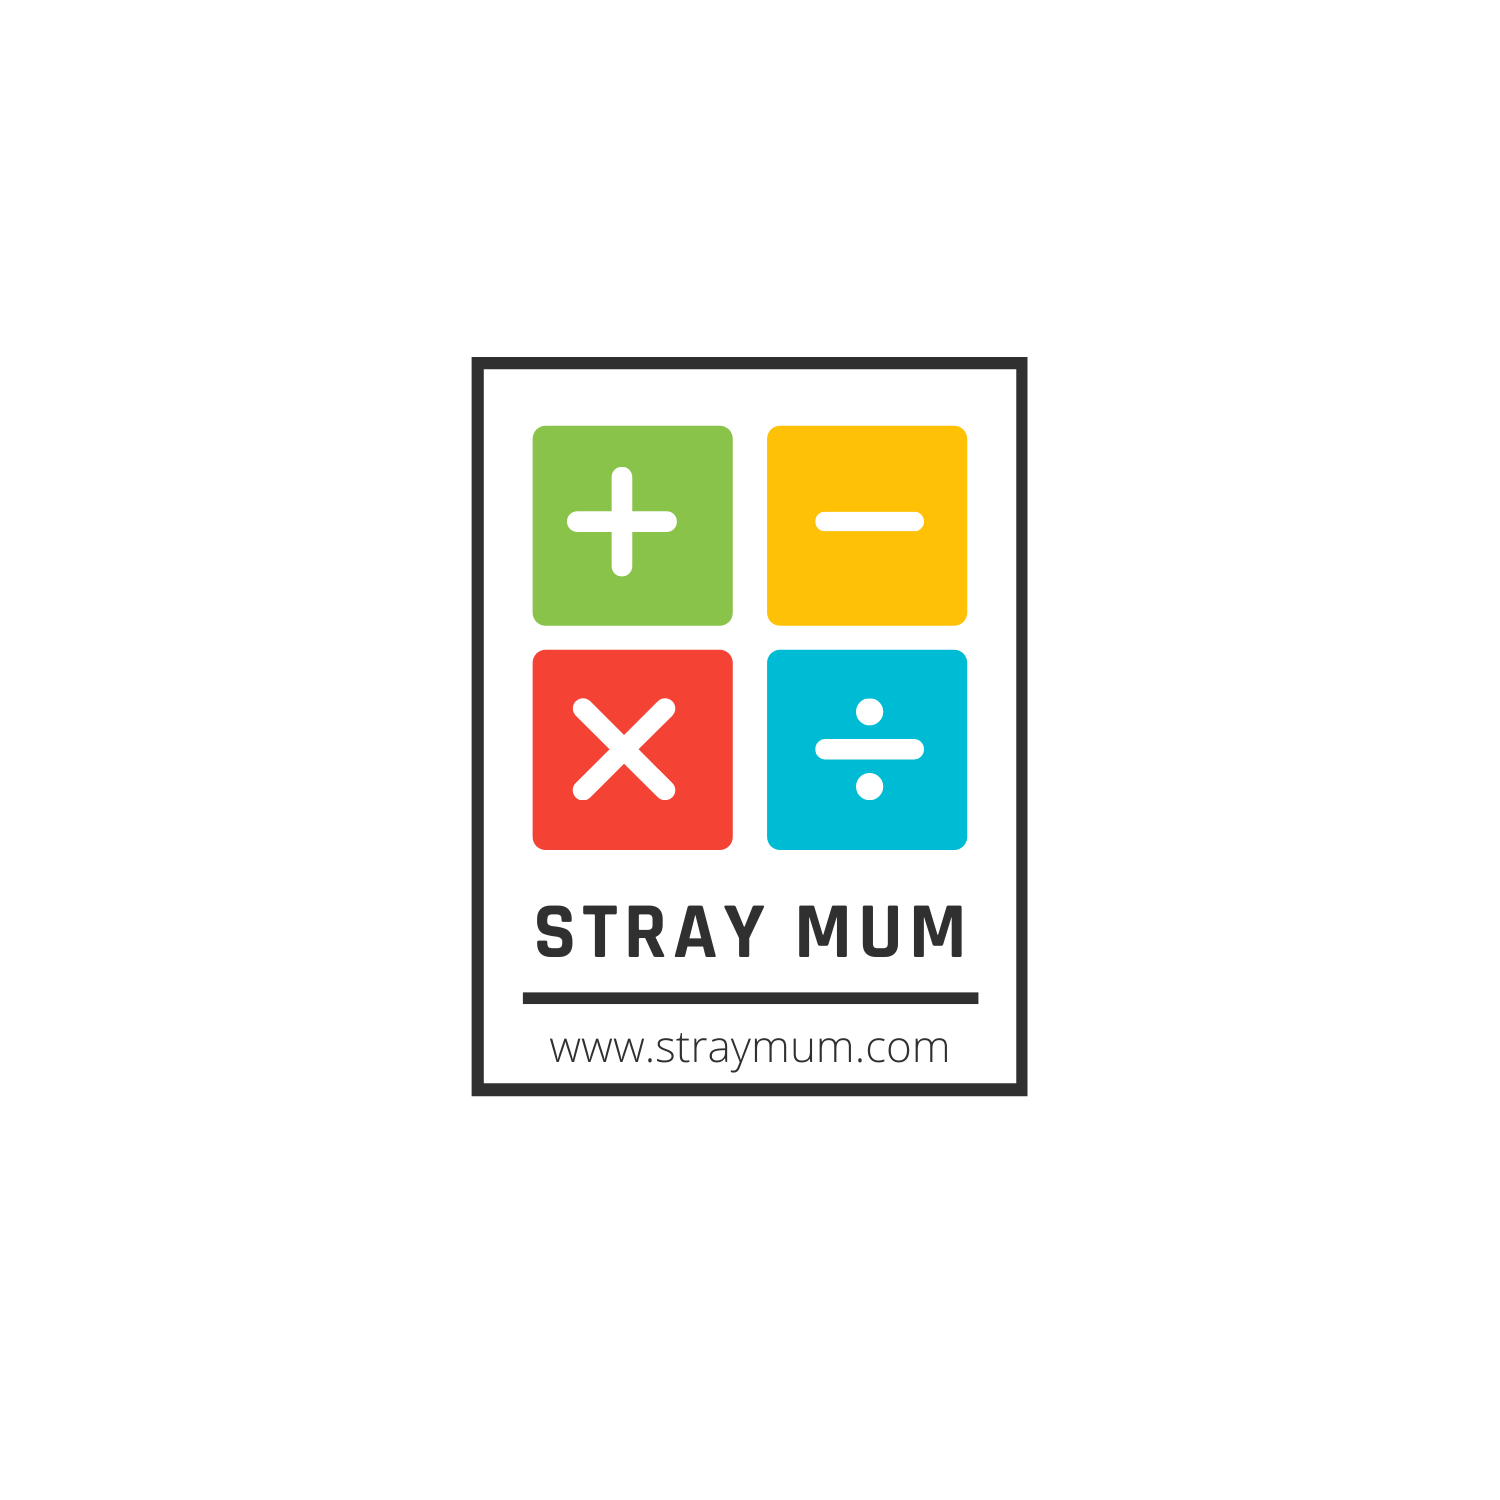 Reflective Writing Prompts: Learning Through Self-Reflection - Stray Mum